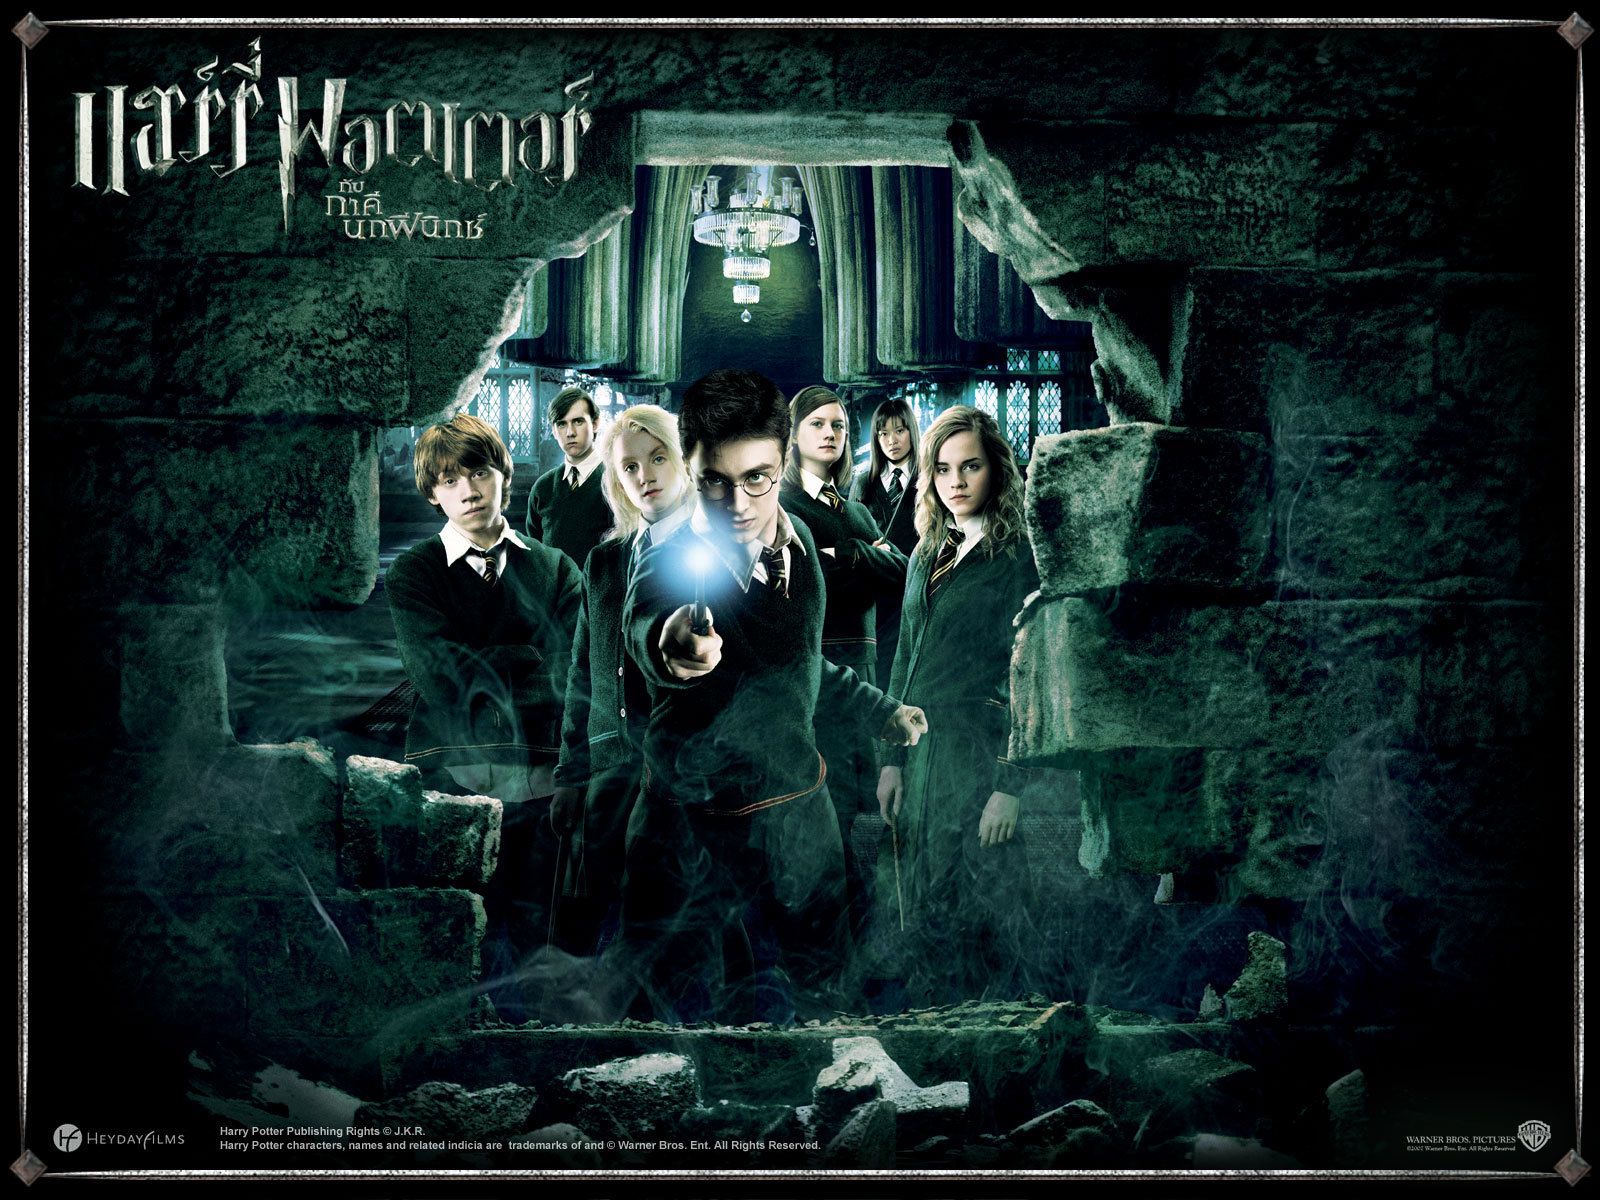 Harry Potter Characters - wallpaper.